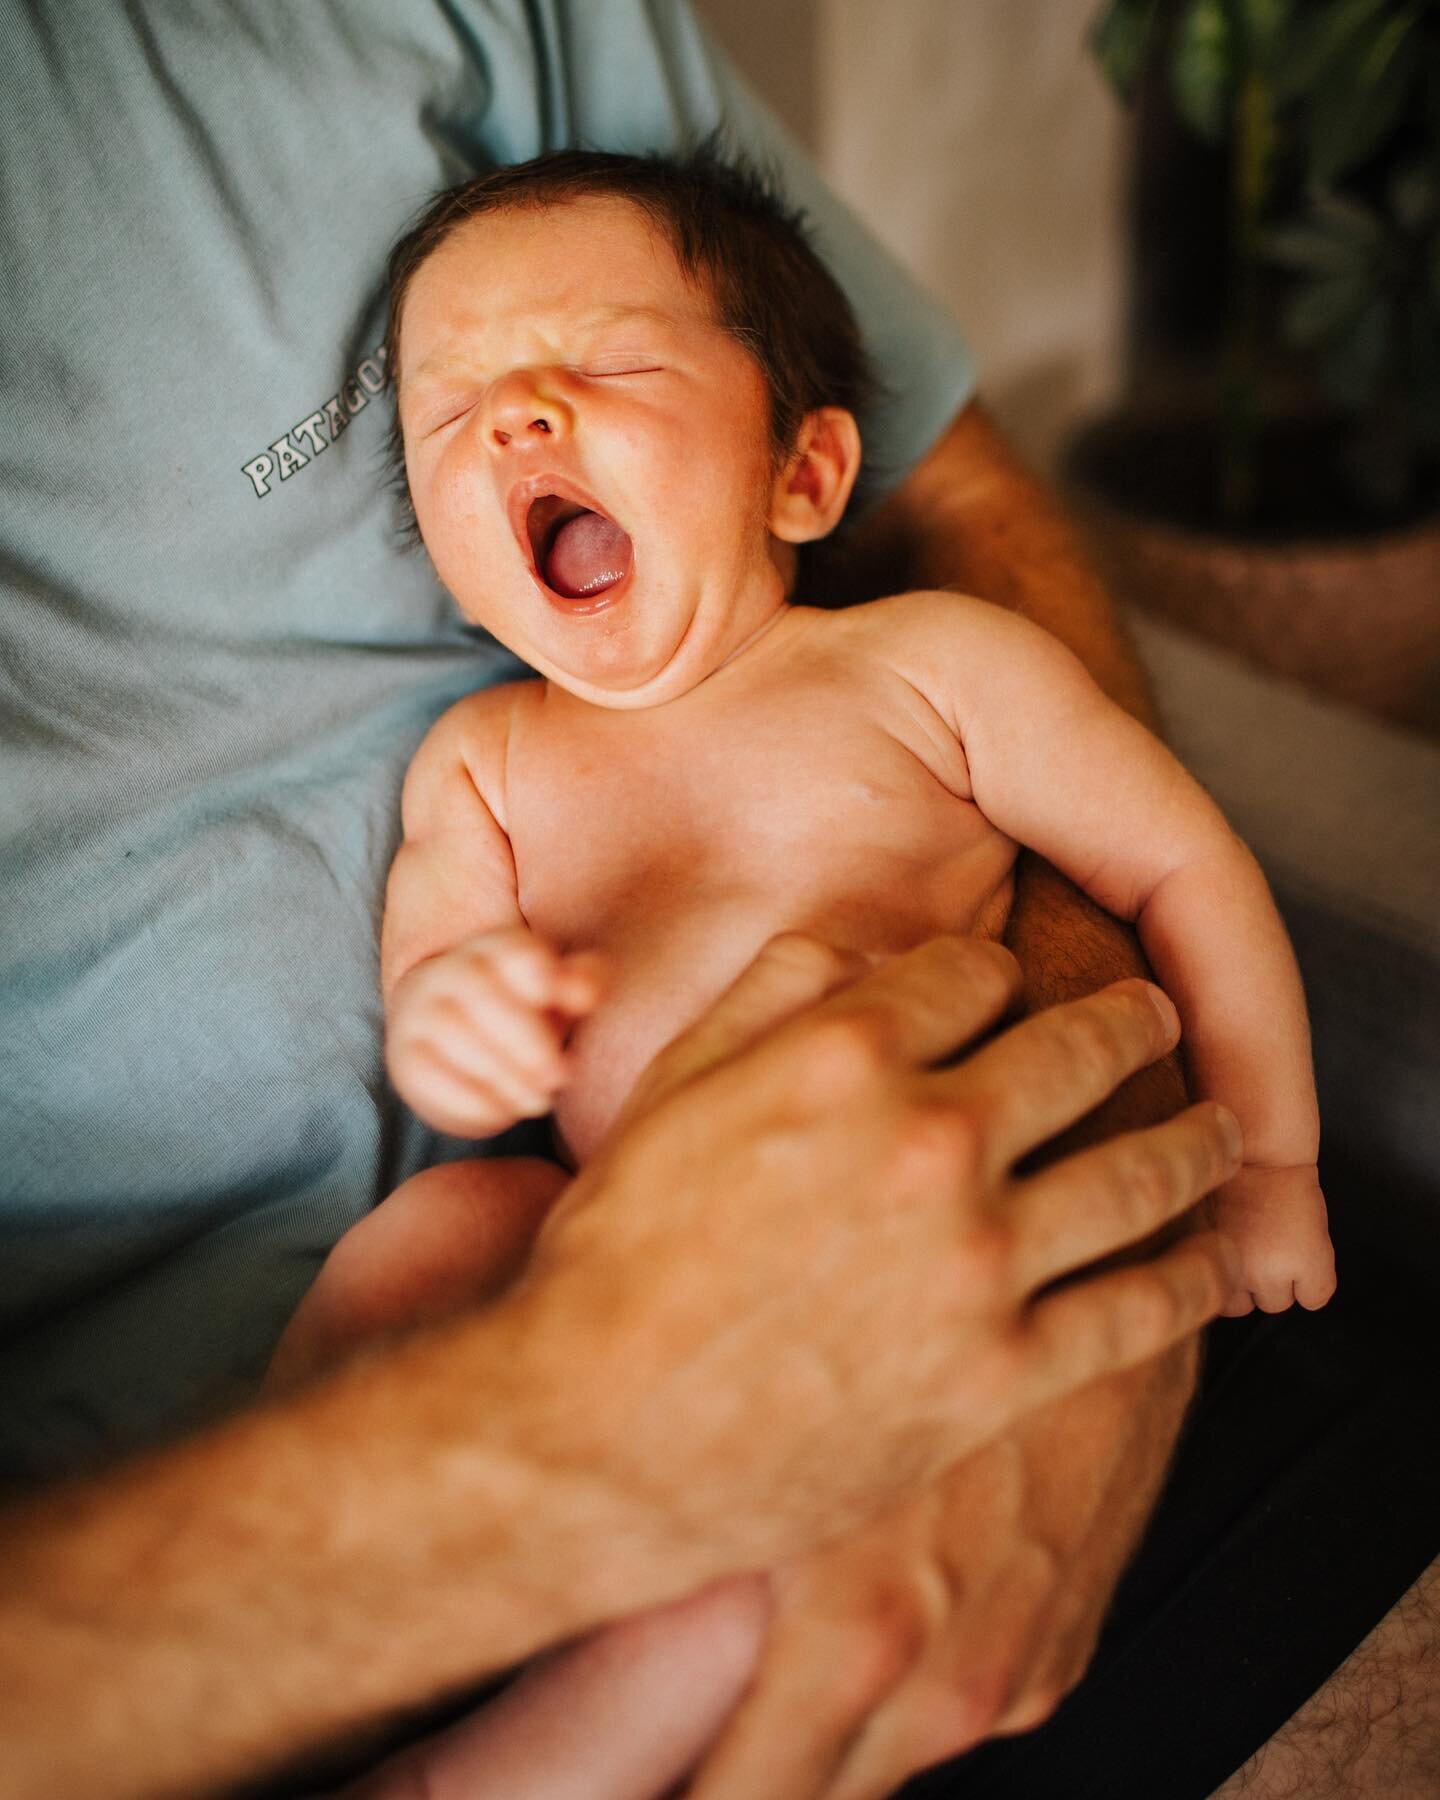 A new little one arrived into our family last month and he&rsquo;s simply perfection. 

He also sums up a Monday morning perfectly. 

Welcome to the party Leo, you&rsquo;re gonna have a lot of fun here. 

#binkynixonphotography 
#buckinghamshirefamil